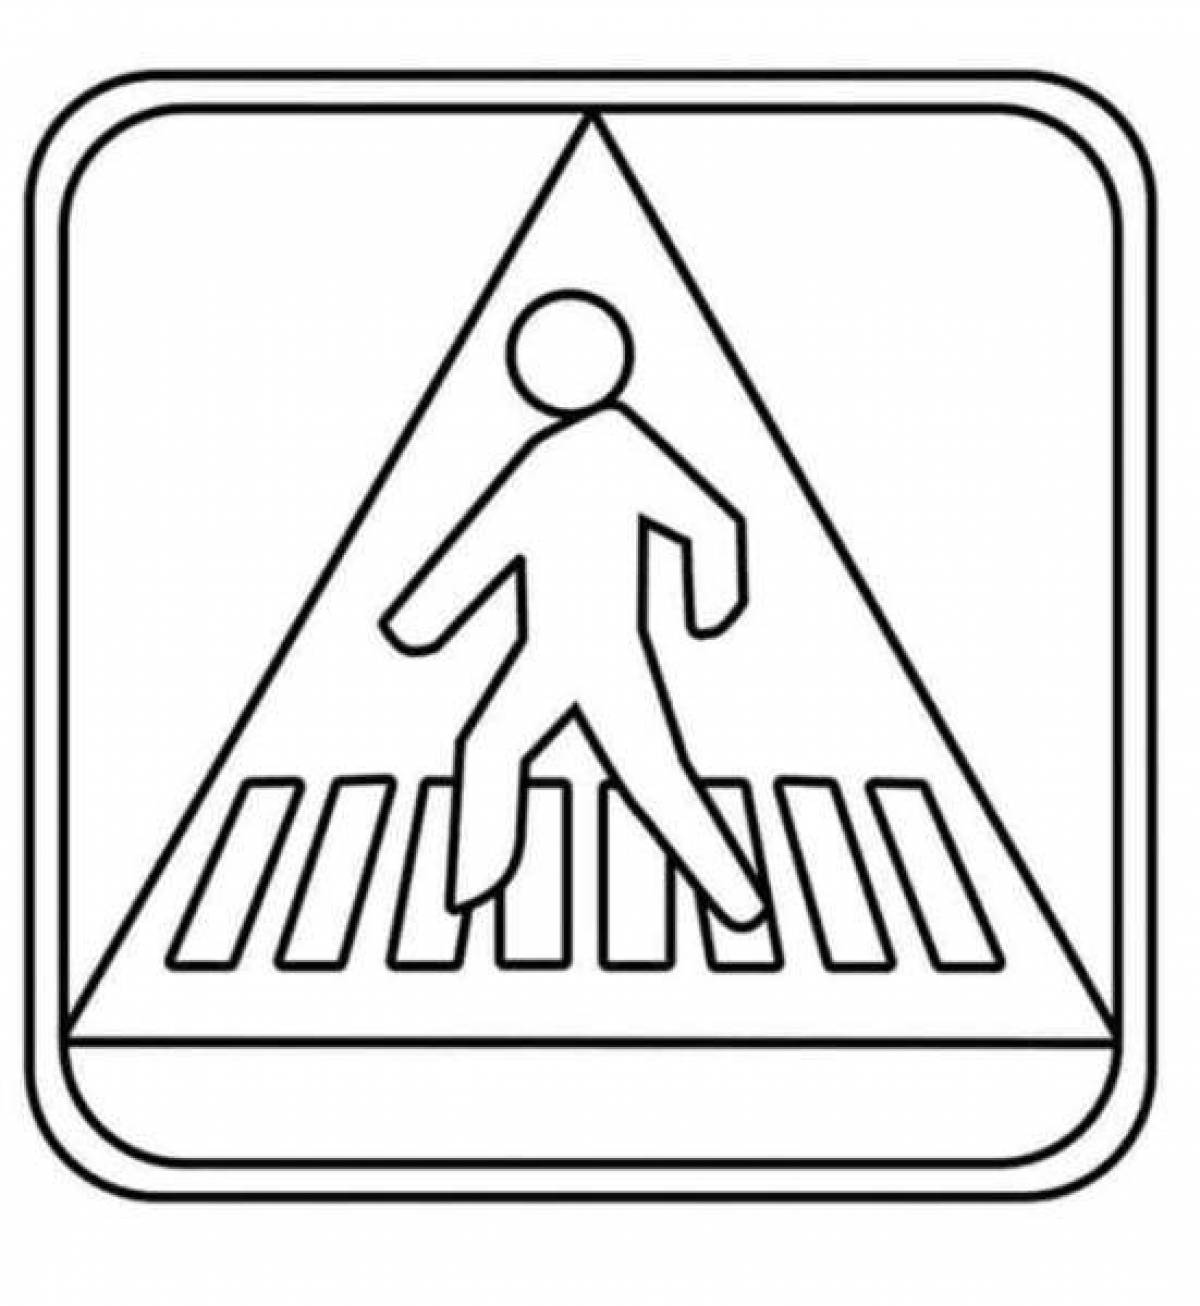 Animated crosswalk coloring page